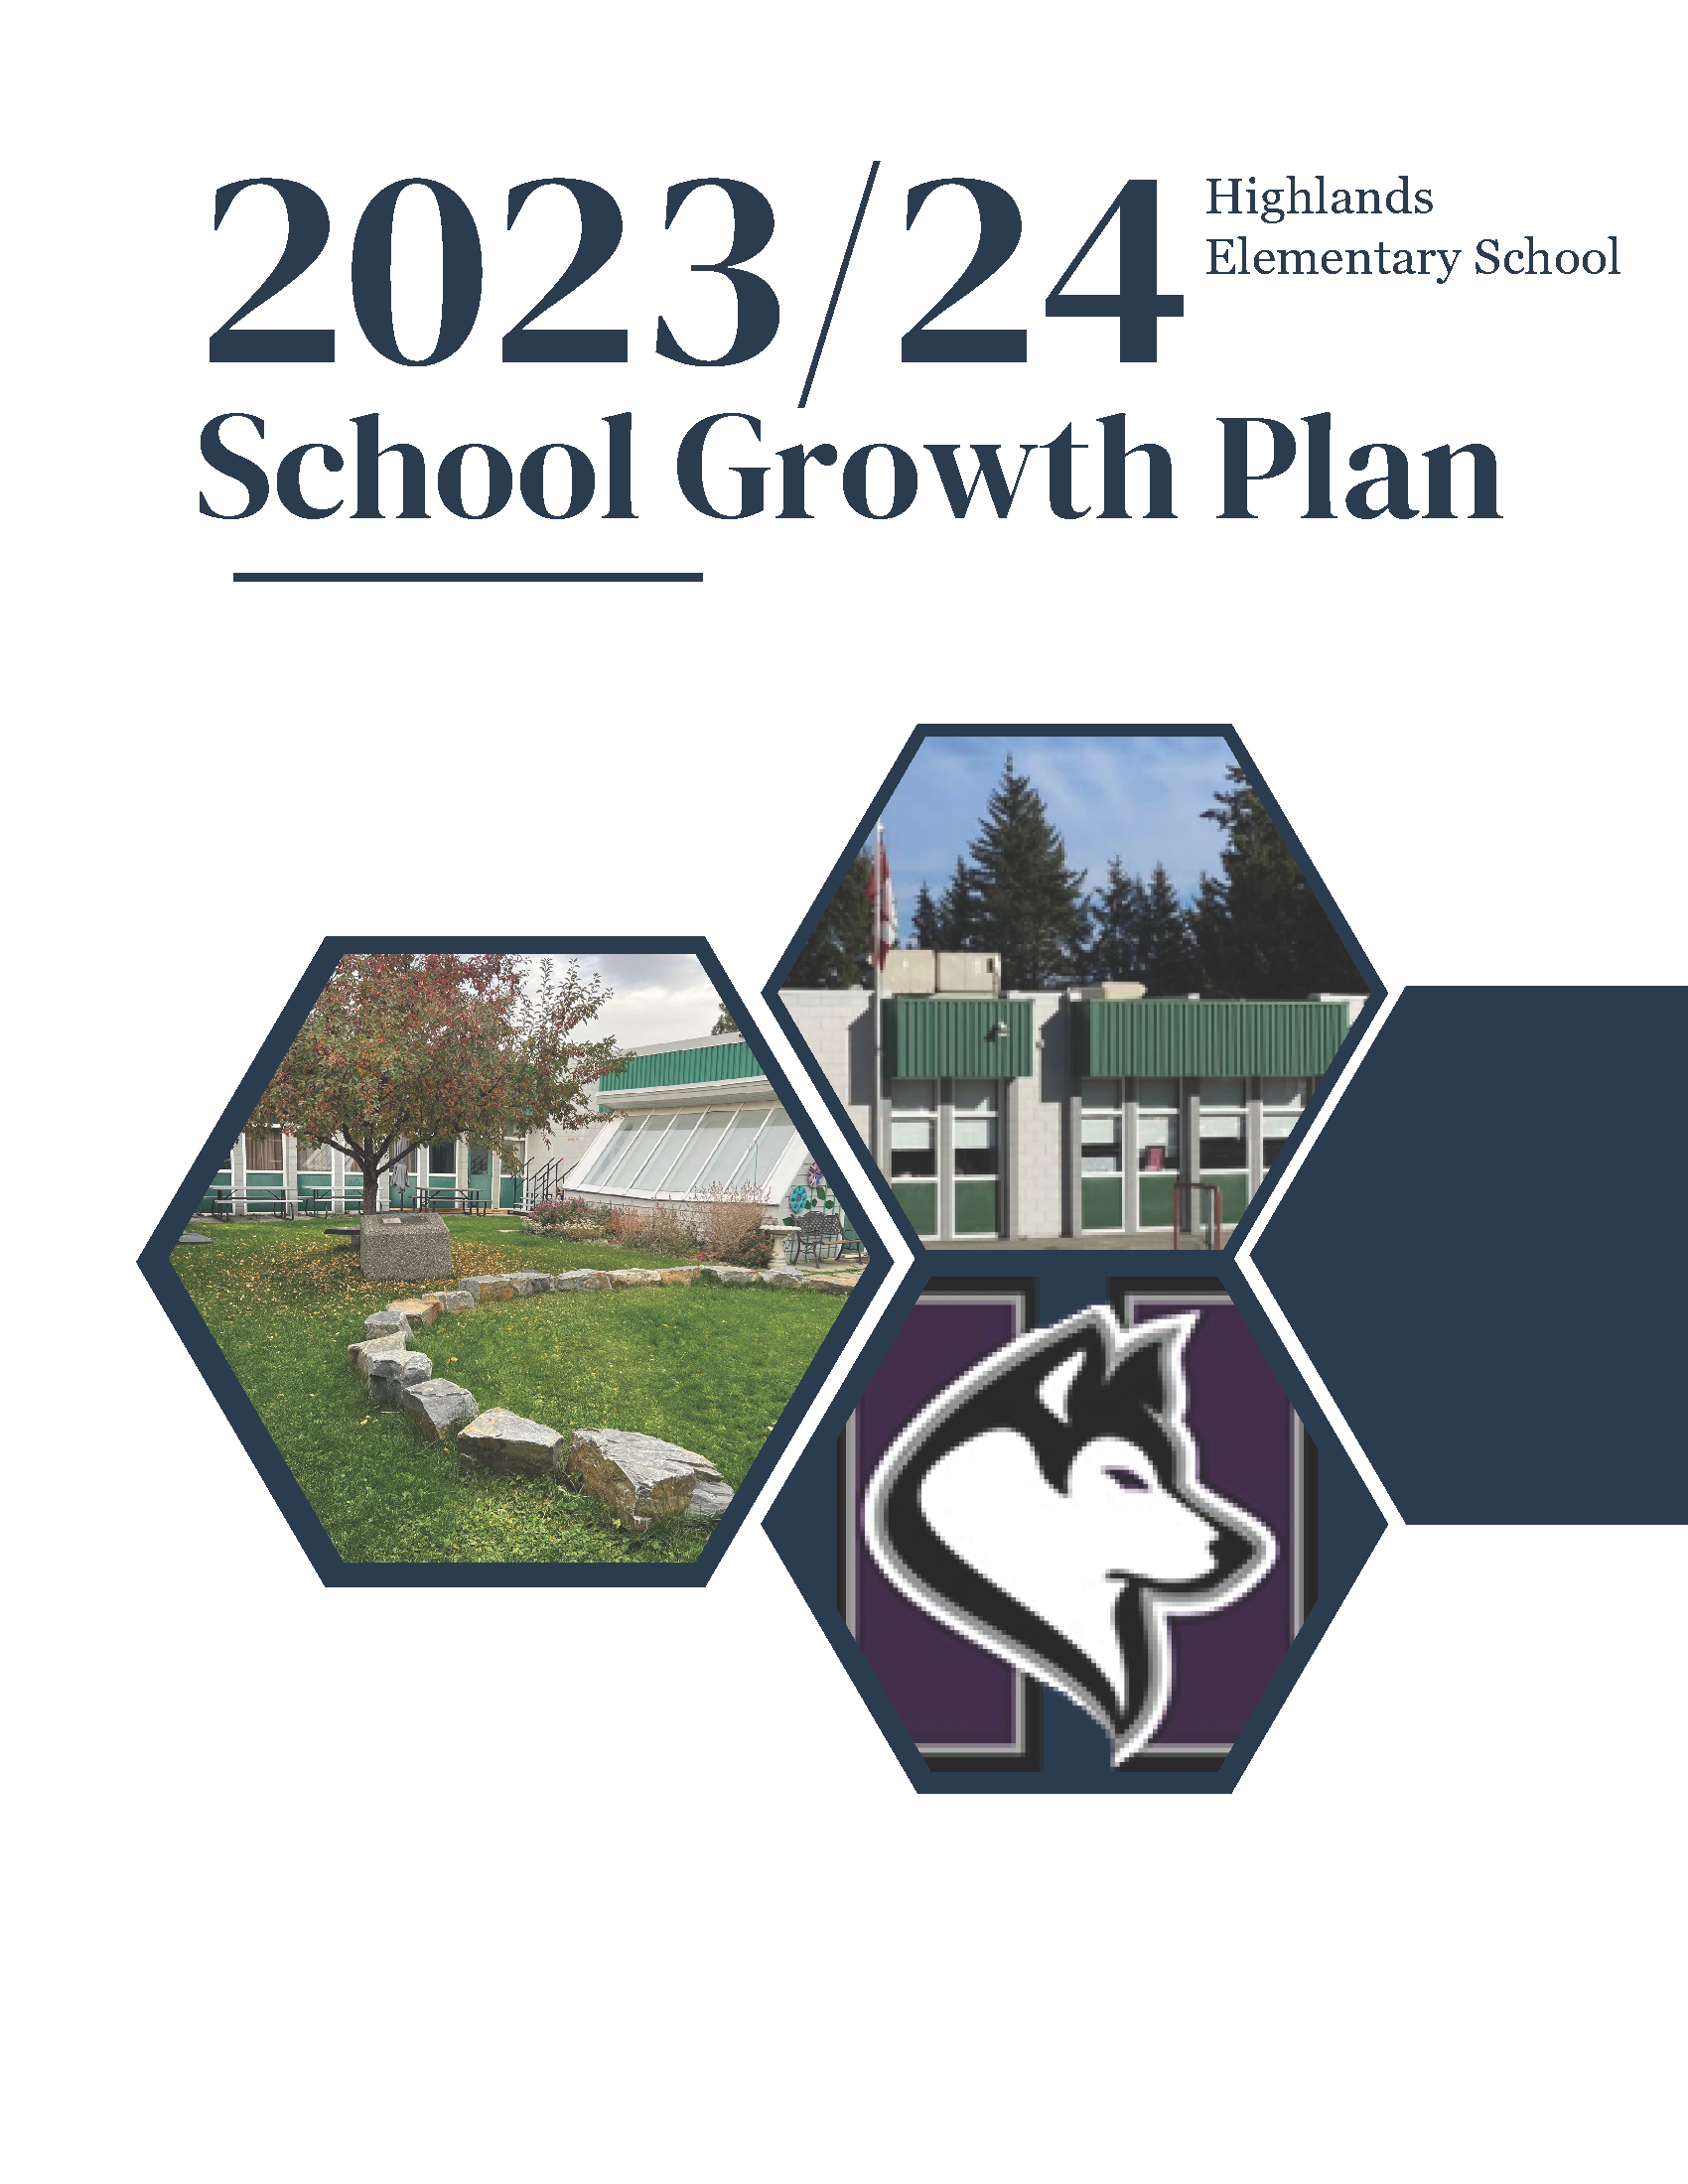 HES Growth Plan (002)_Page_1.png